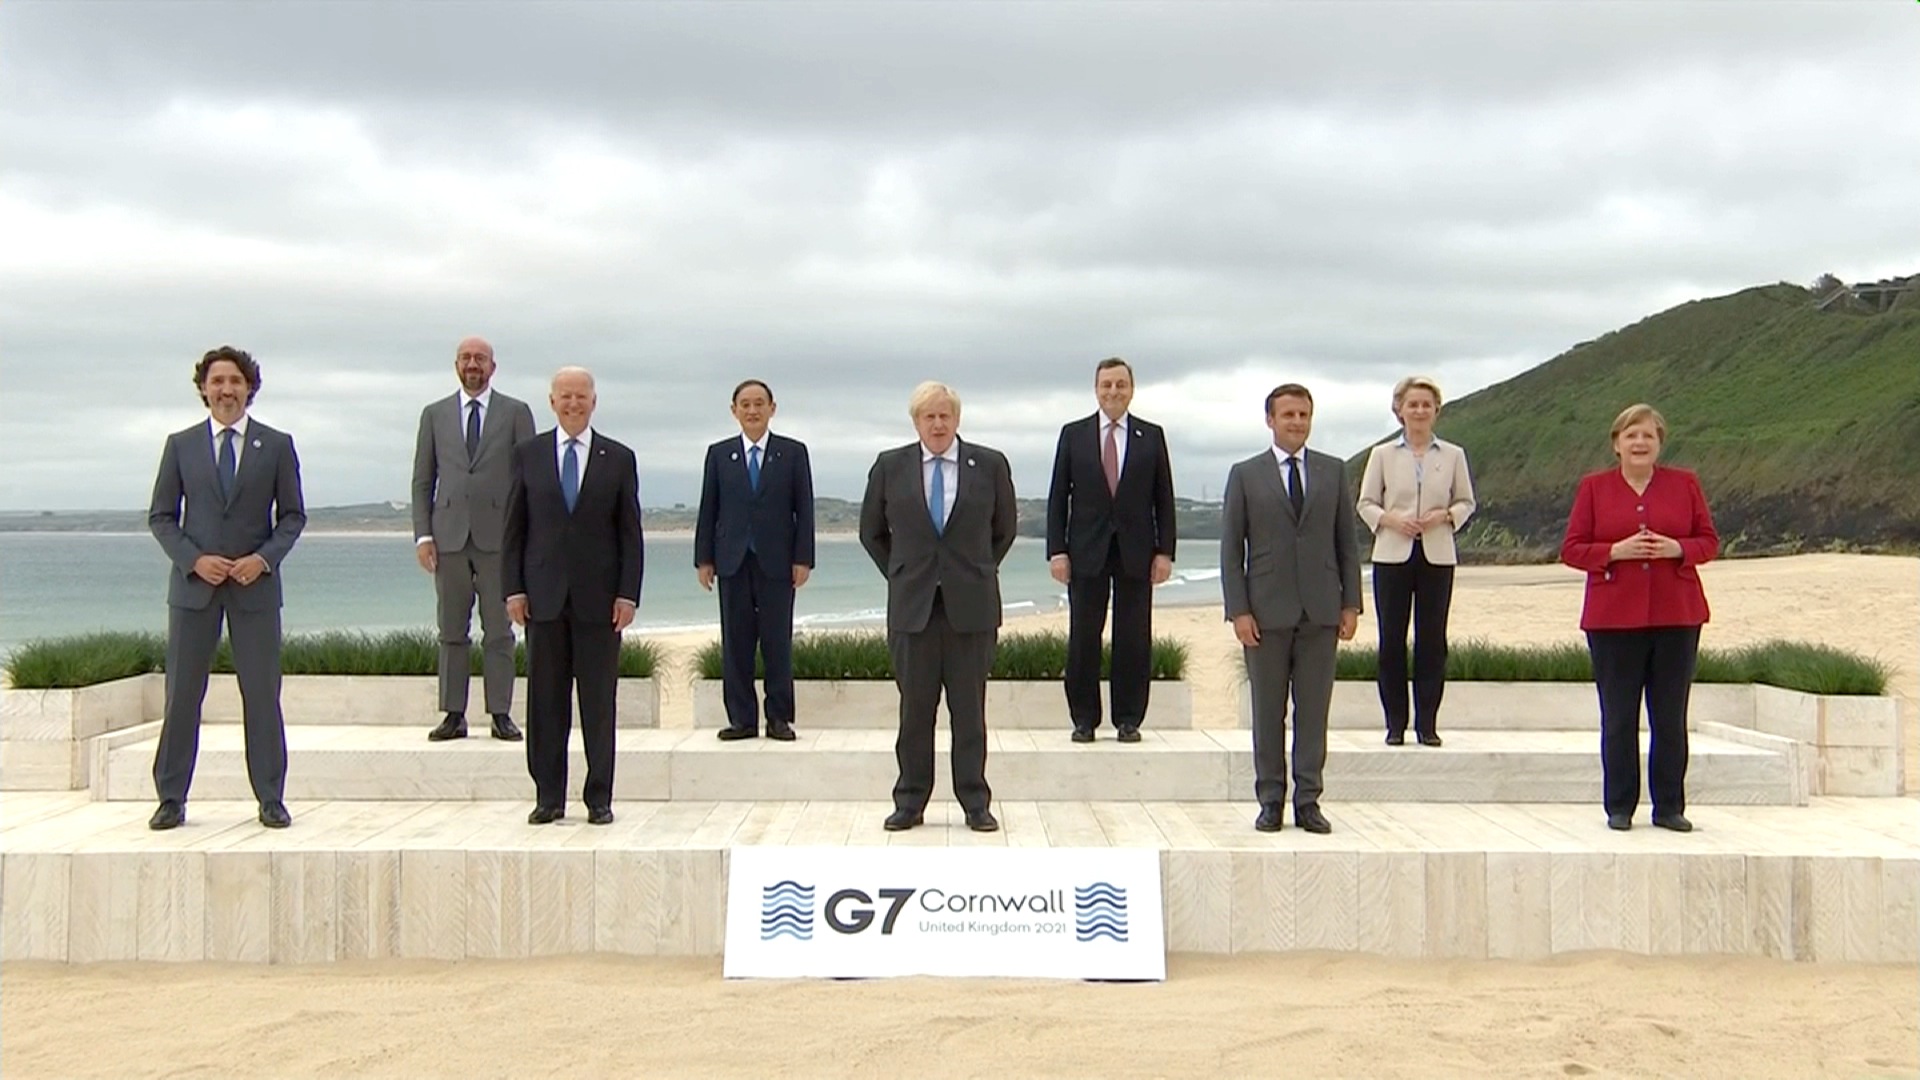 15) G7 leaders pose for "family photo" ahead of first day of summit